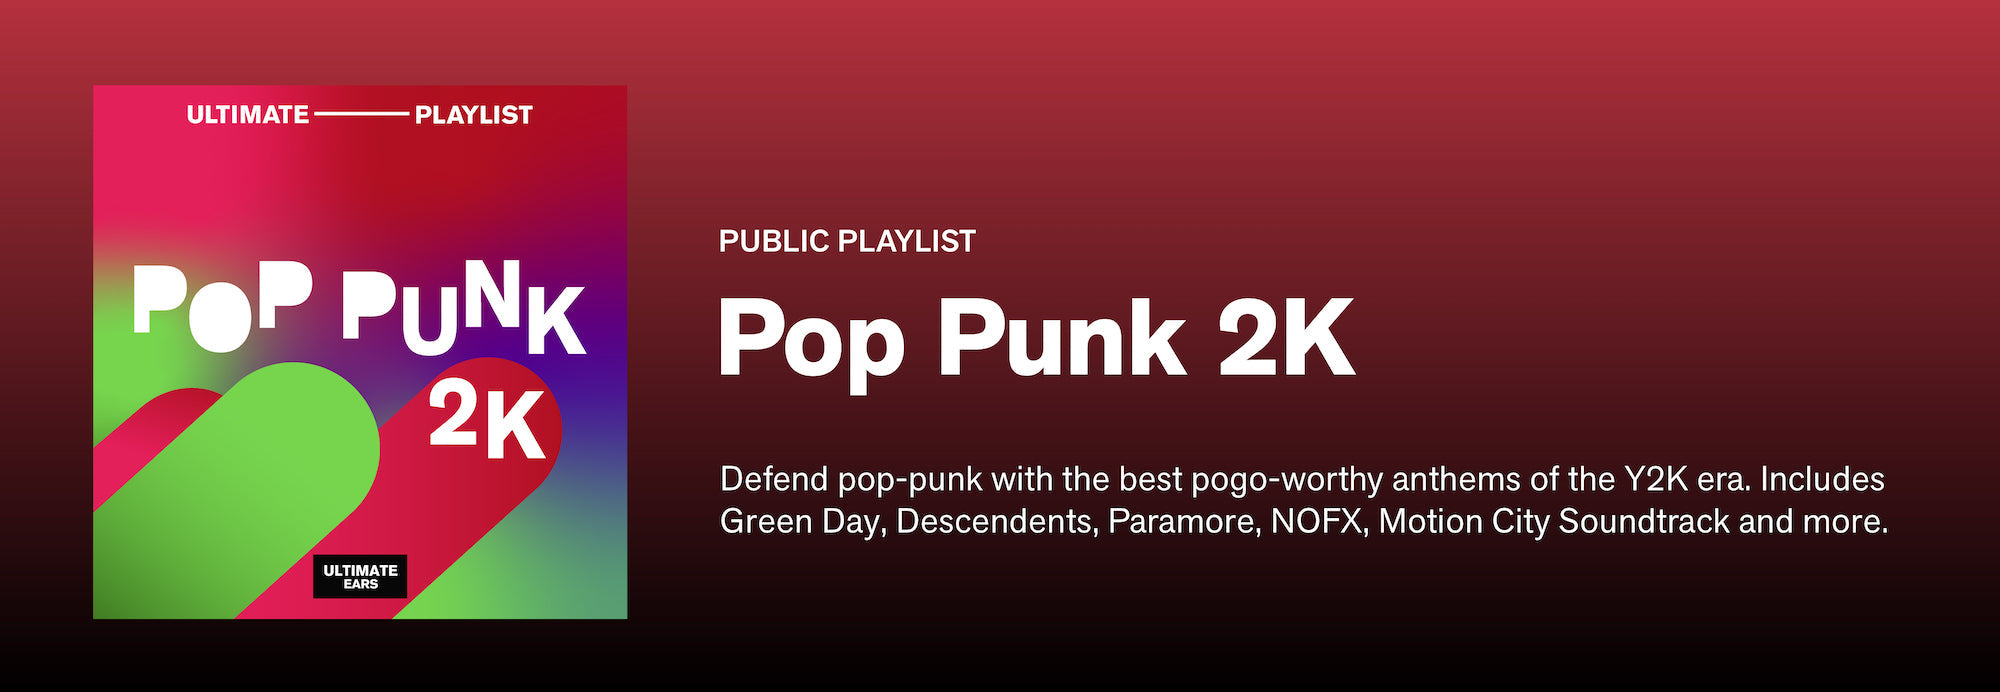 Immersive Pop-Punk Tracks From the 2000s